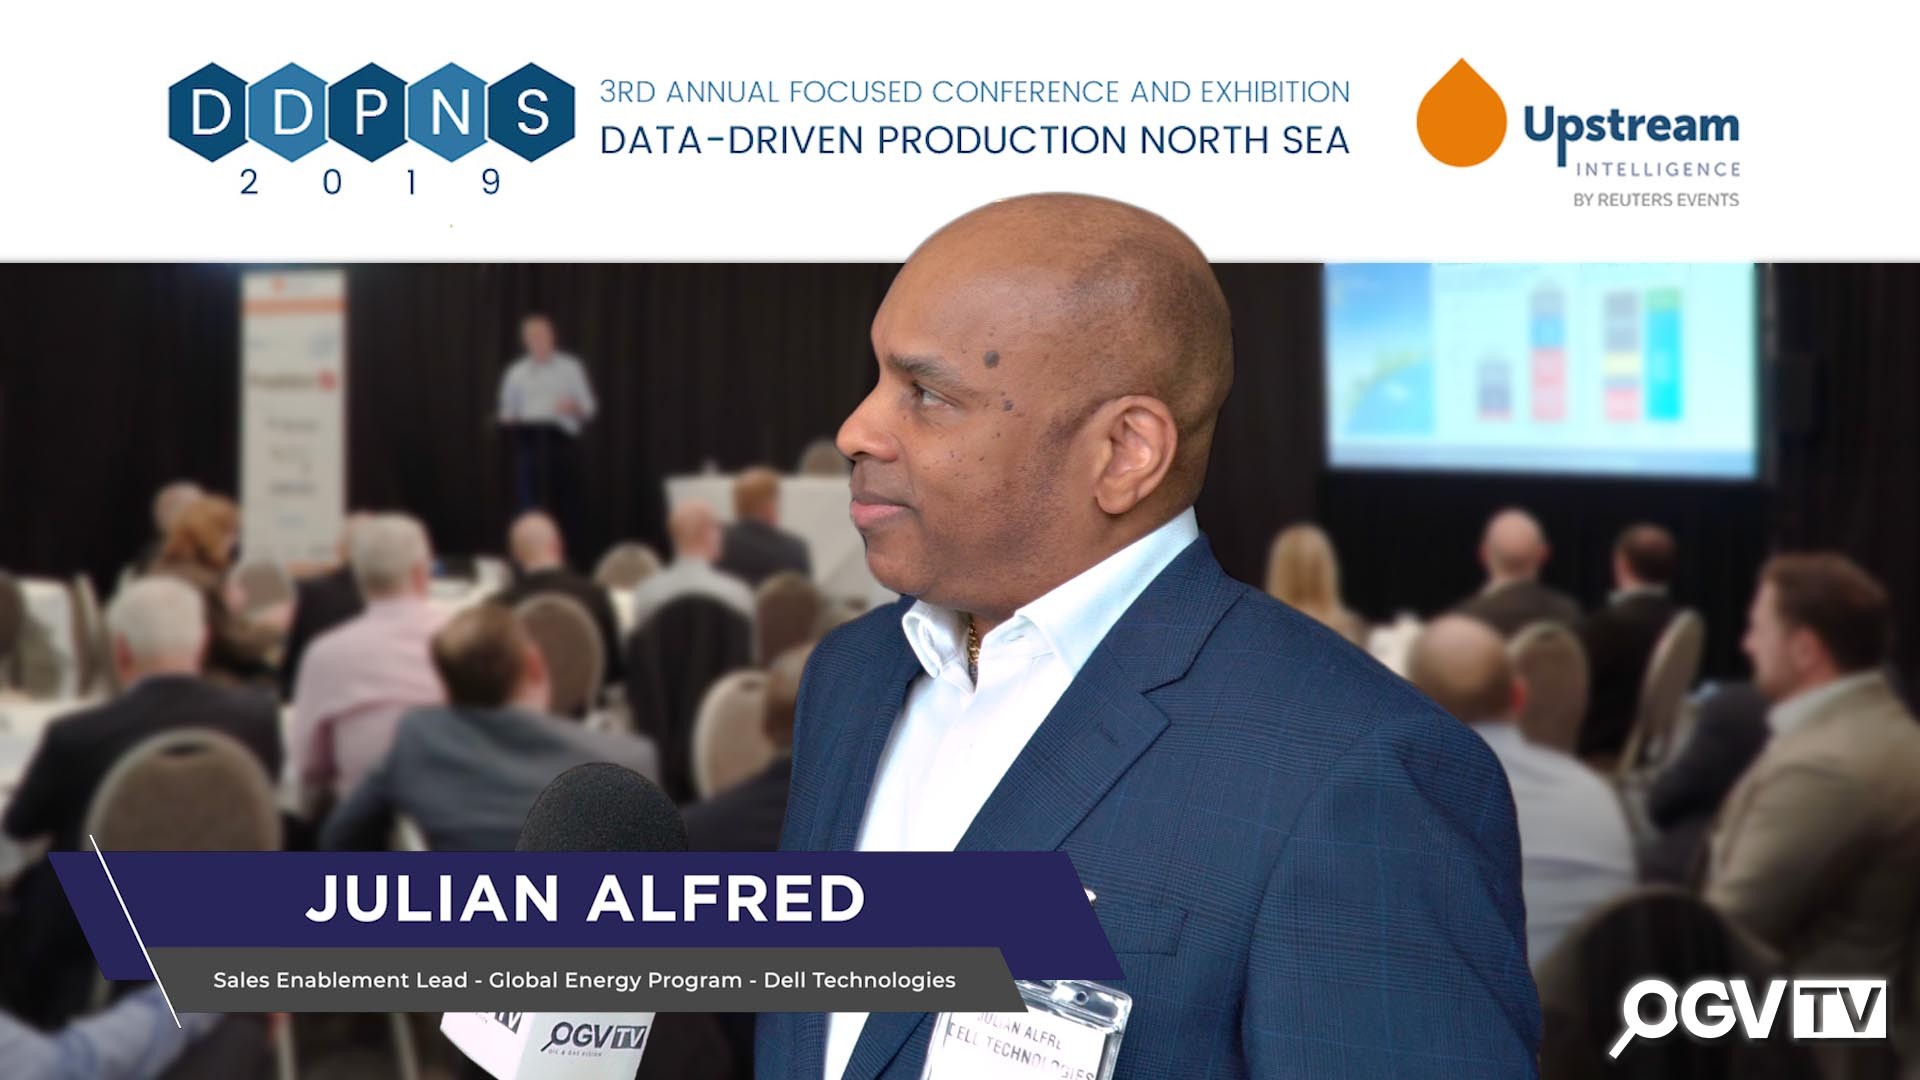 DDPNS 2019 - DELL TECHNOLOGIES - AI and data can improve oil field operations